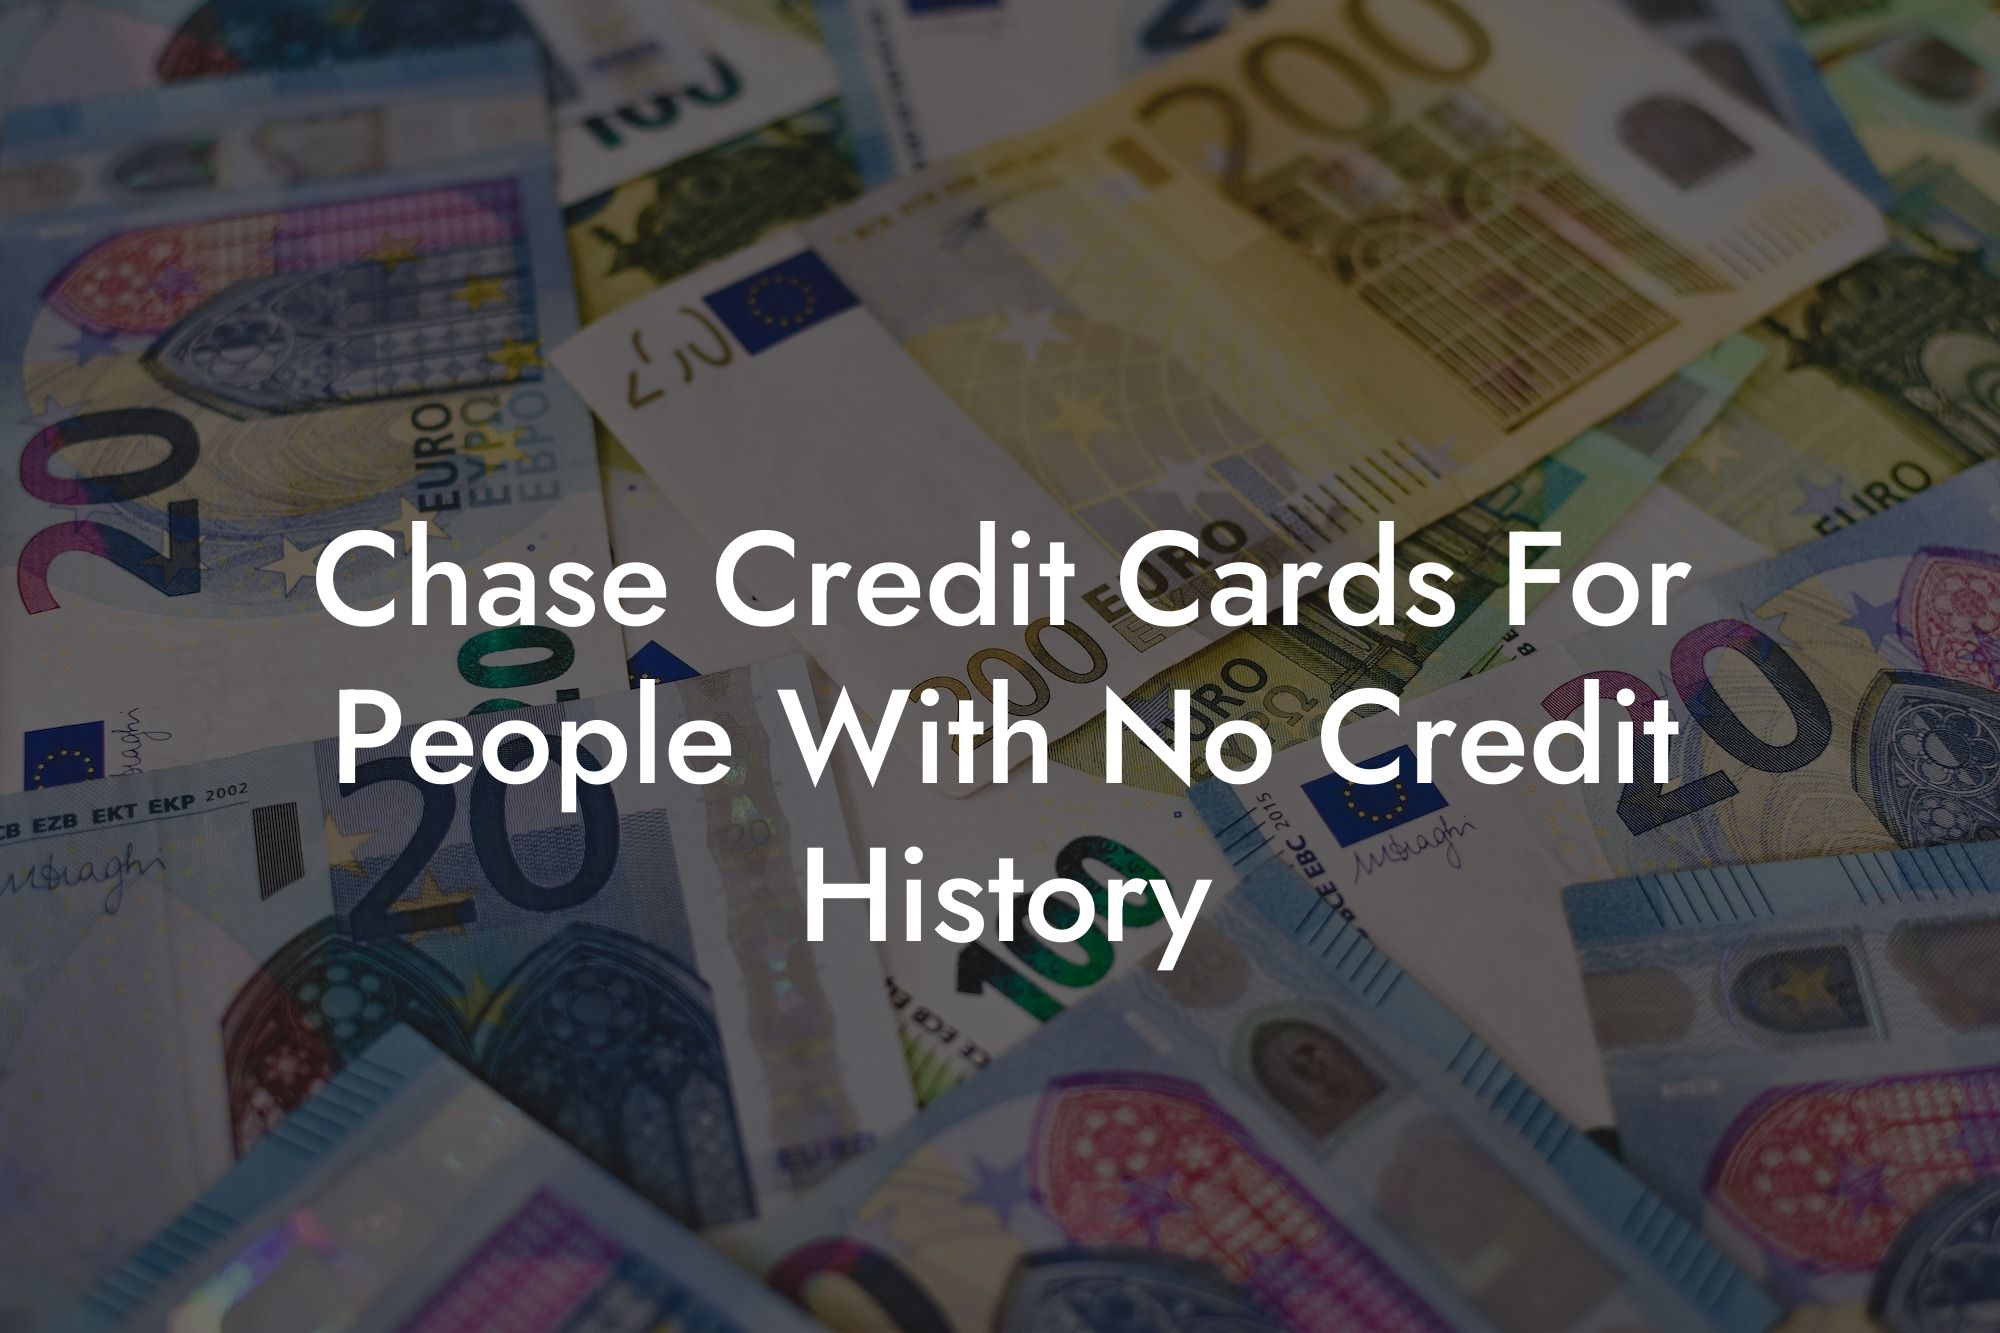 Chase Credit Cards For People With No Credit History